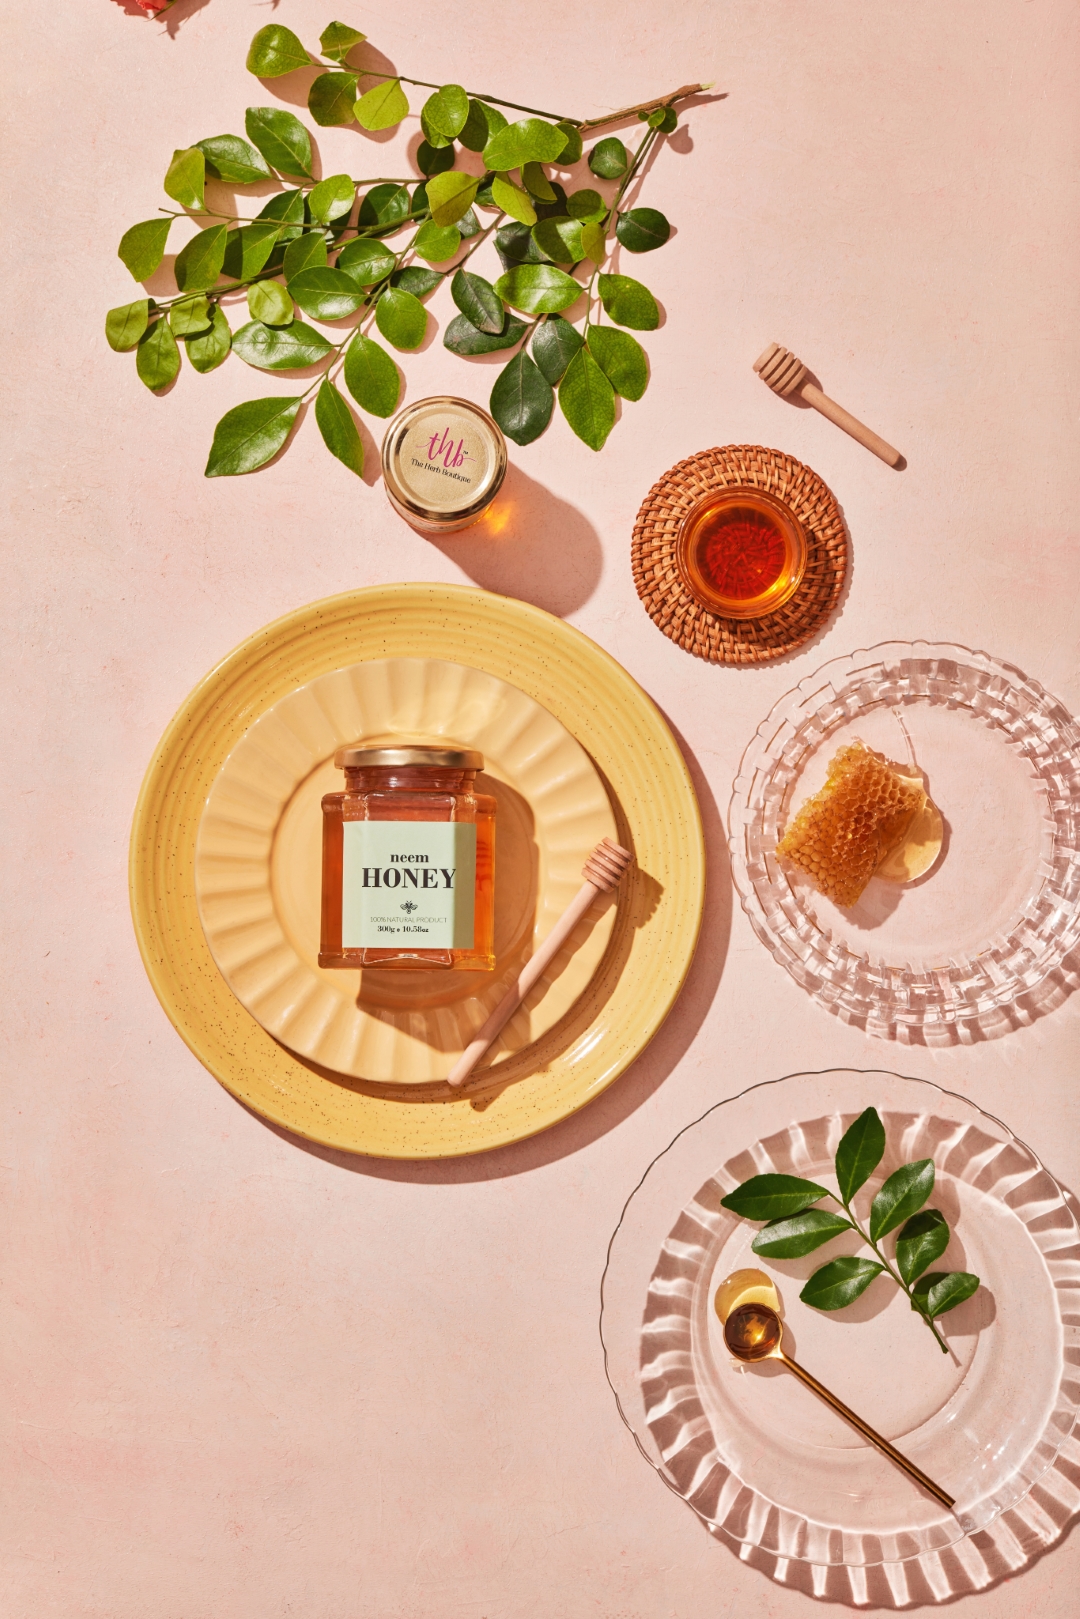 Product: The Herb Boutique Neem Honey